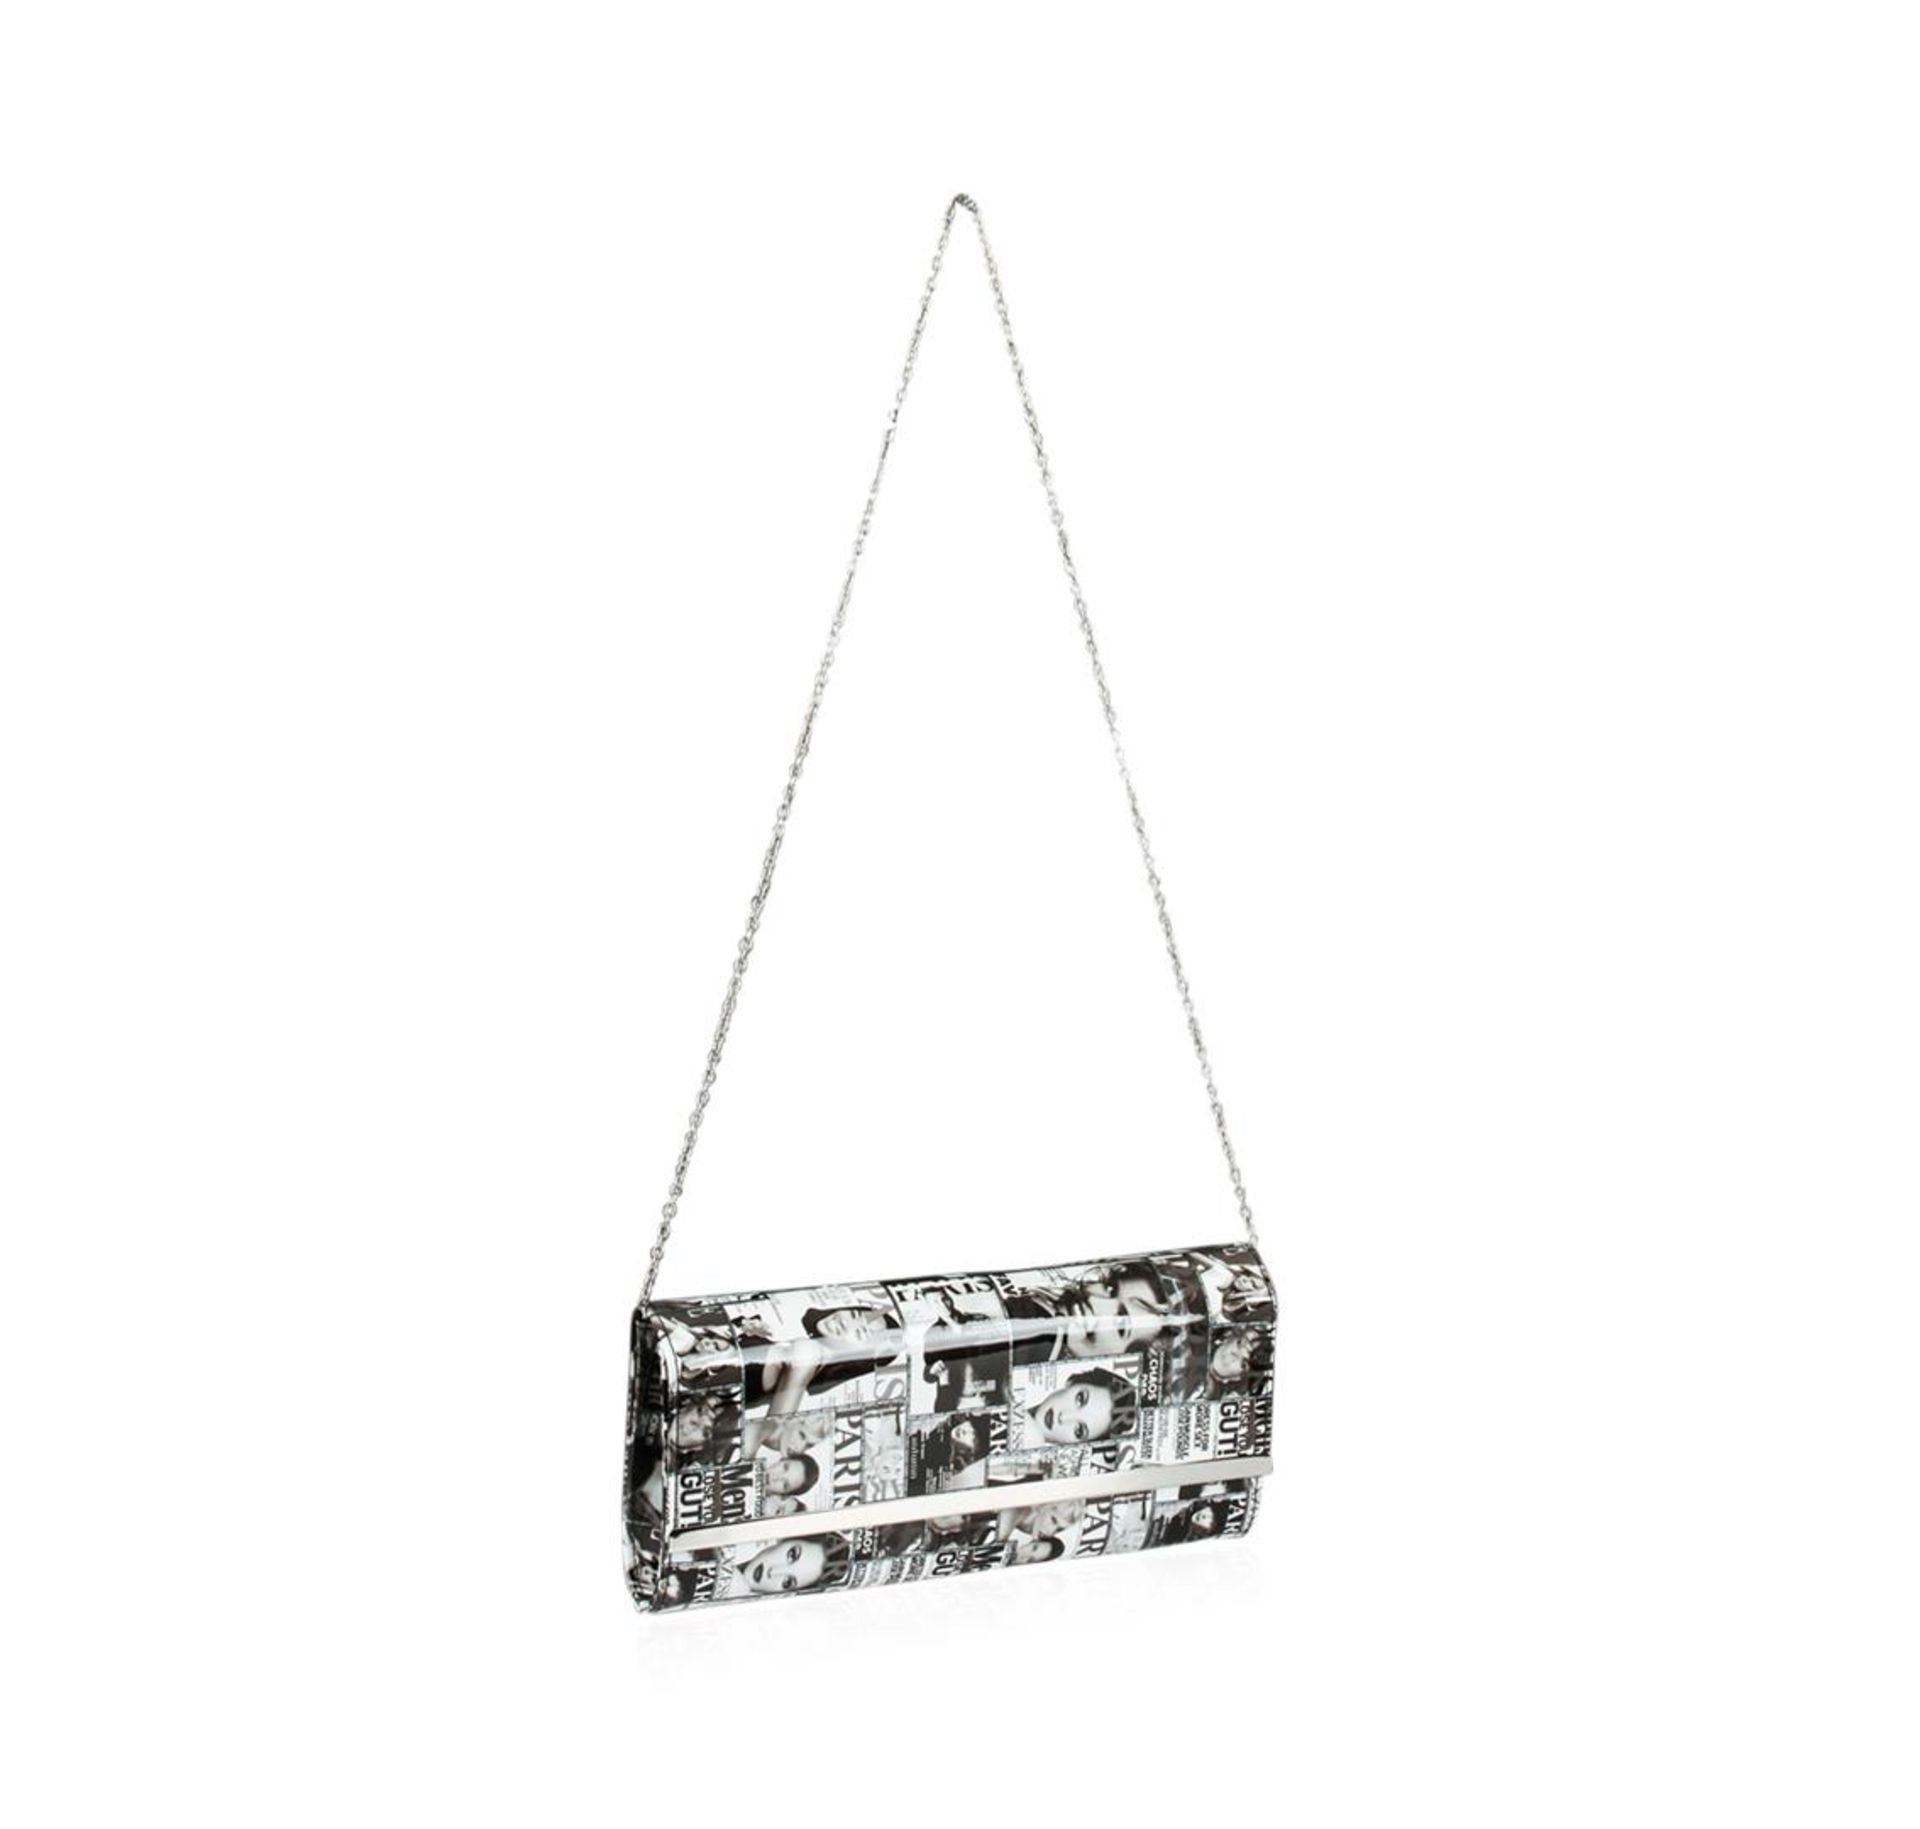 Black and White Fashionista Patent Oversized Clutch - Image 3 of 3